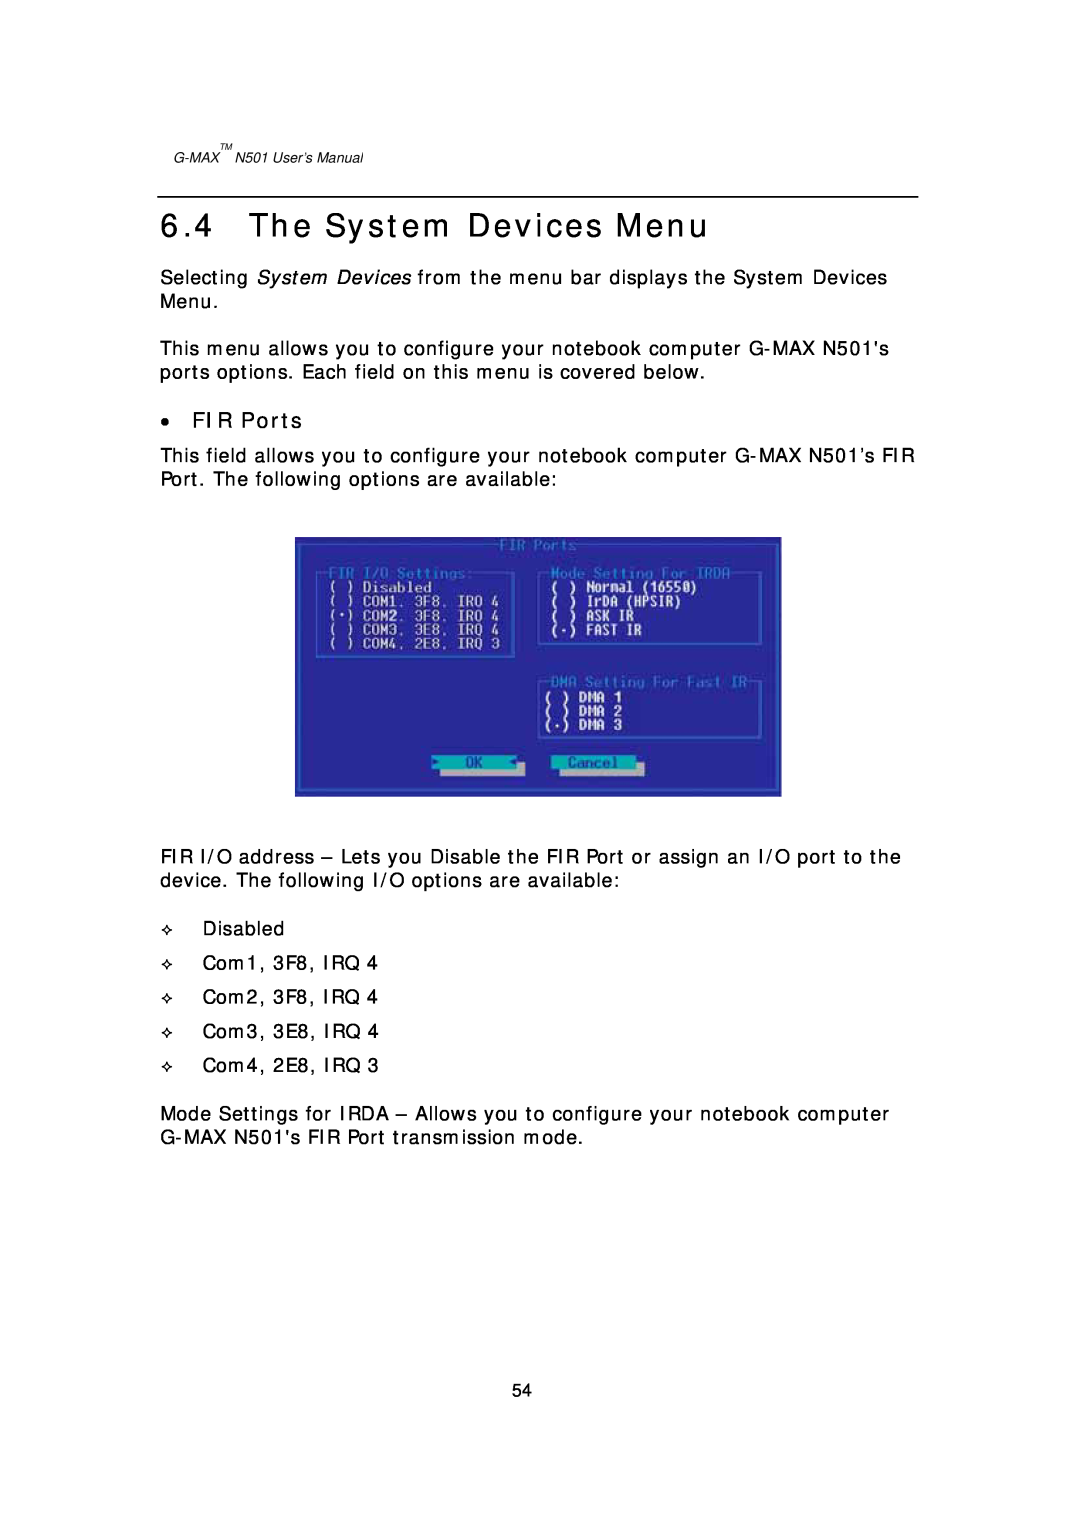 Gigabyte G-MAX N501 user manual The System Devices Menu, FIR Ports 